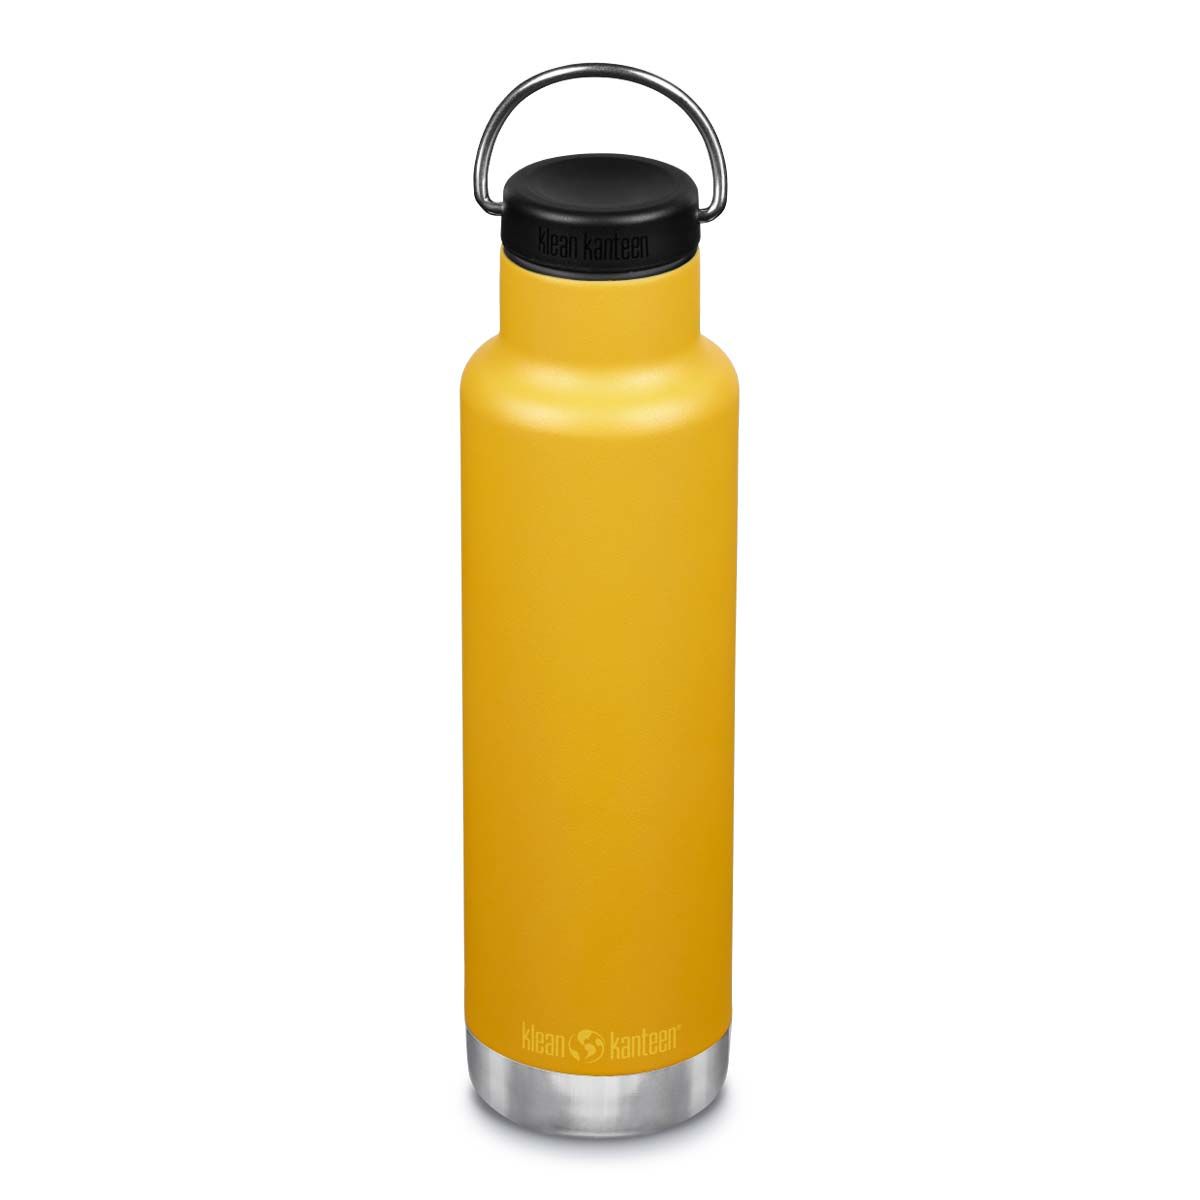 Bouteille isotherme Klean Kanteen Classic jaune